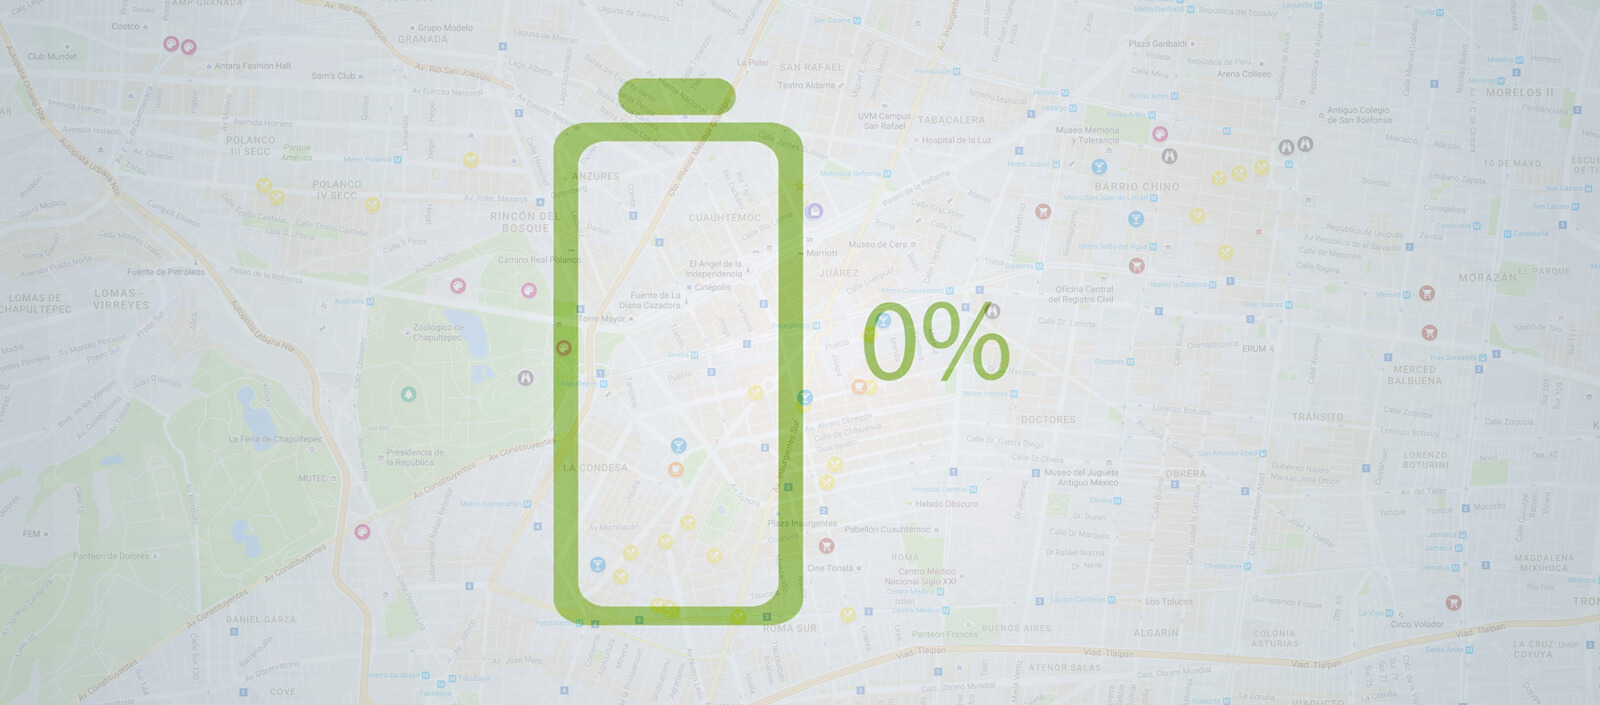 Google Maps location sharing now also shares your phone’s battery life